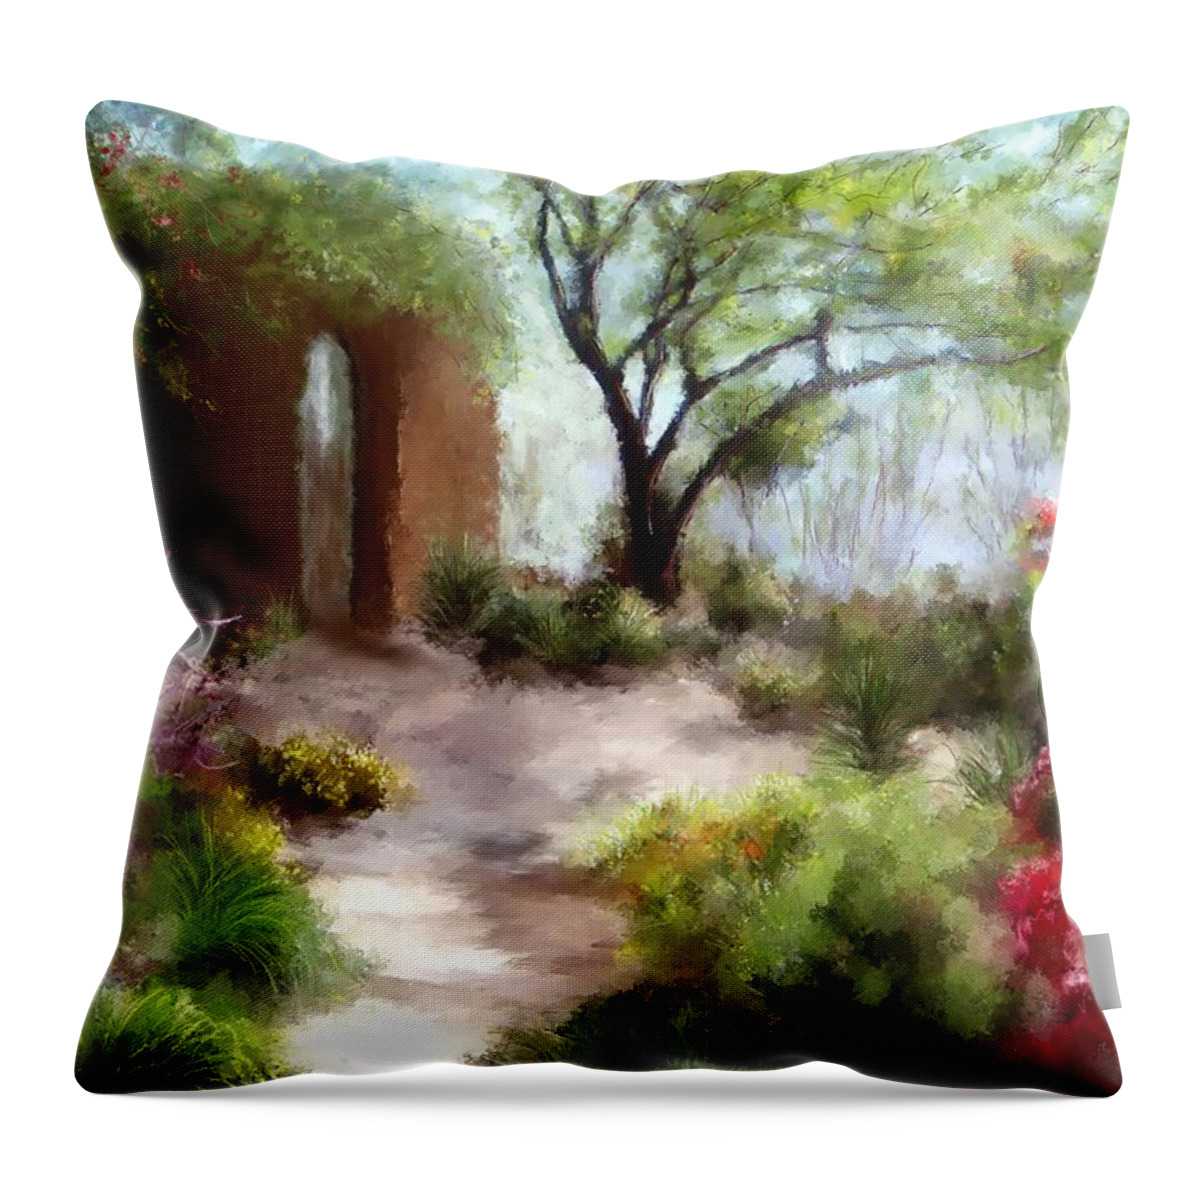 Southwest Paintings Throw Pillow featuring the painting The Meditative Garden by Colleen Taylor